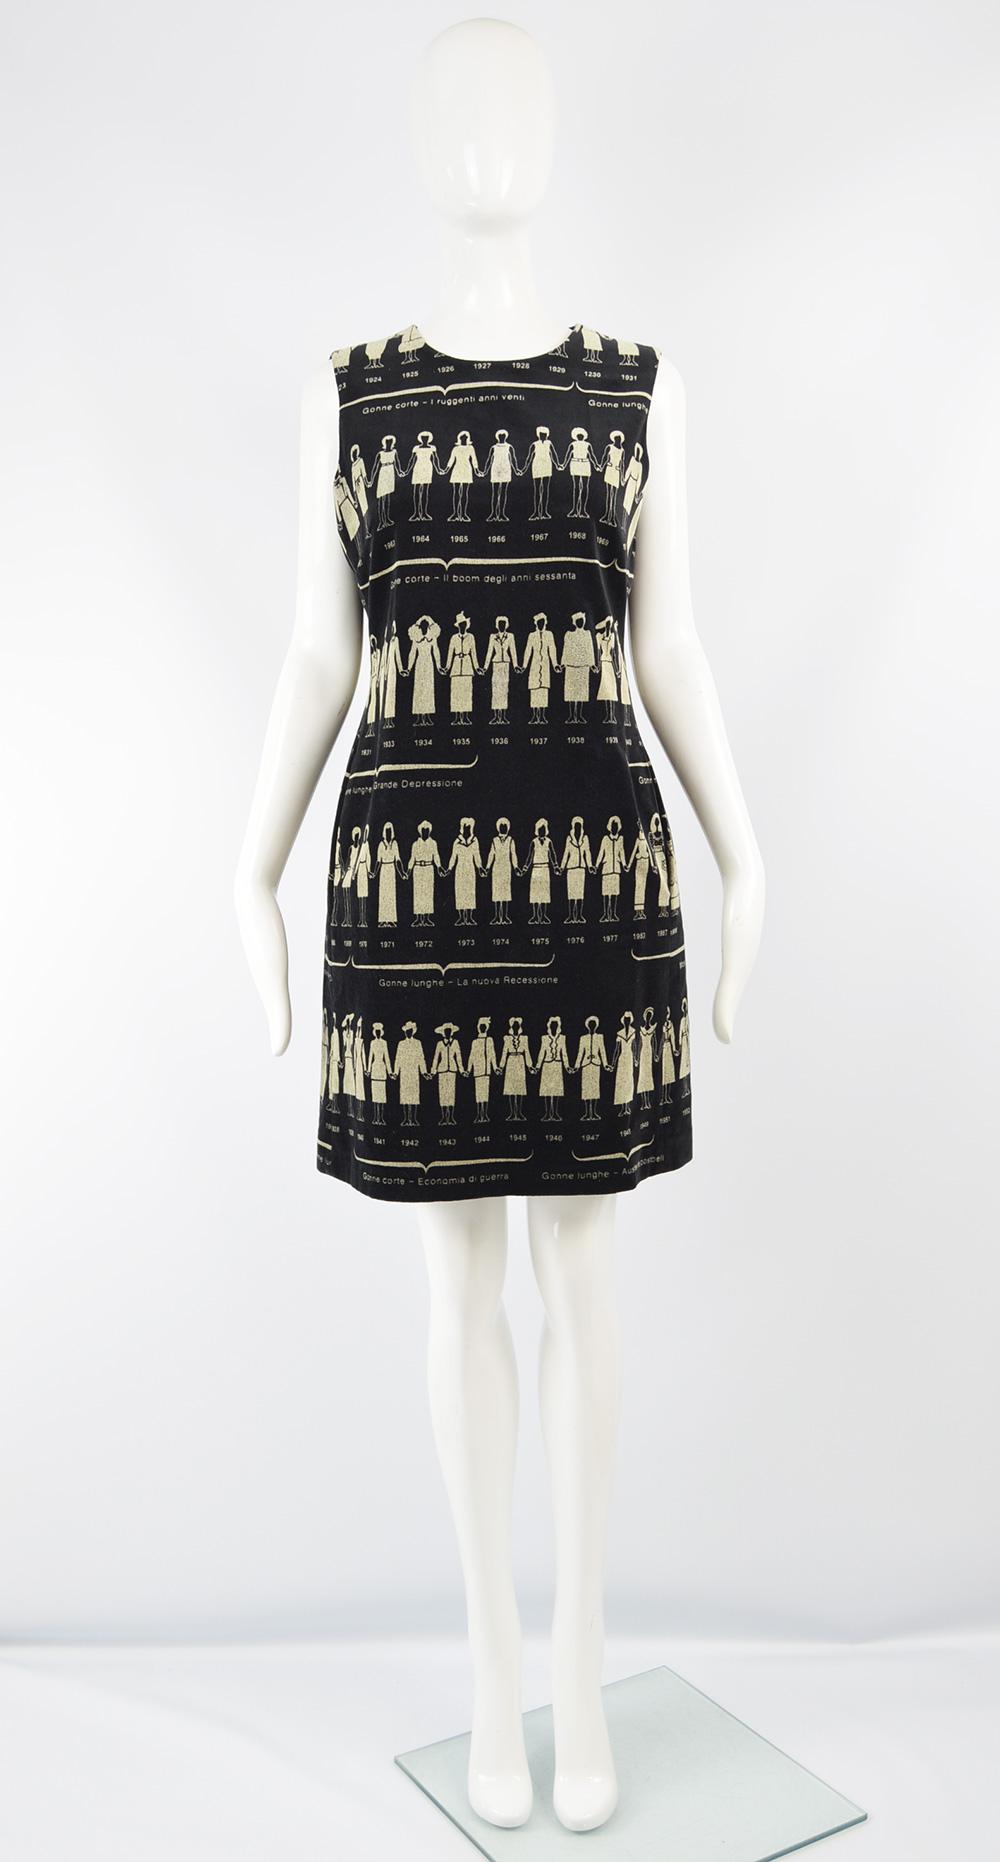 An incredible and rare vintage women's shift dress from the 90s by Moschino. In a black velvet with an amazing print of fashion history, featuring designs from 1923 to 1997, with iconic Moschino designed dresses and suits from 1983 to 1997, the